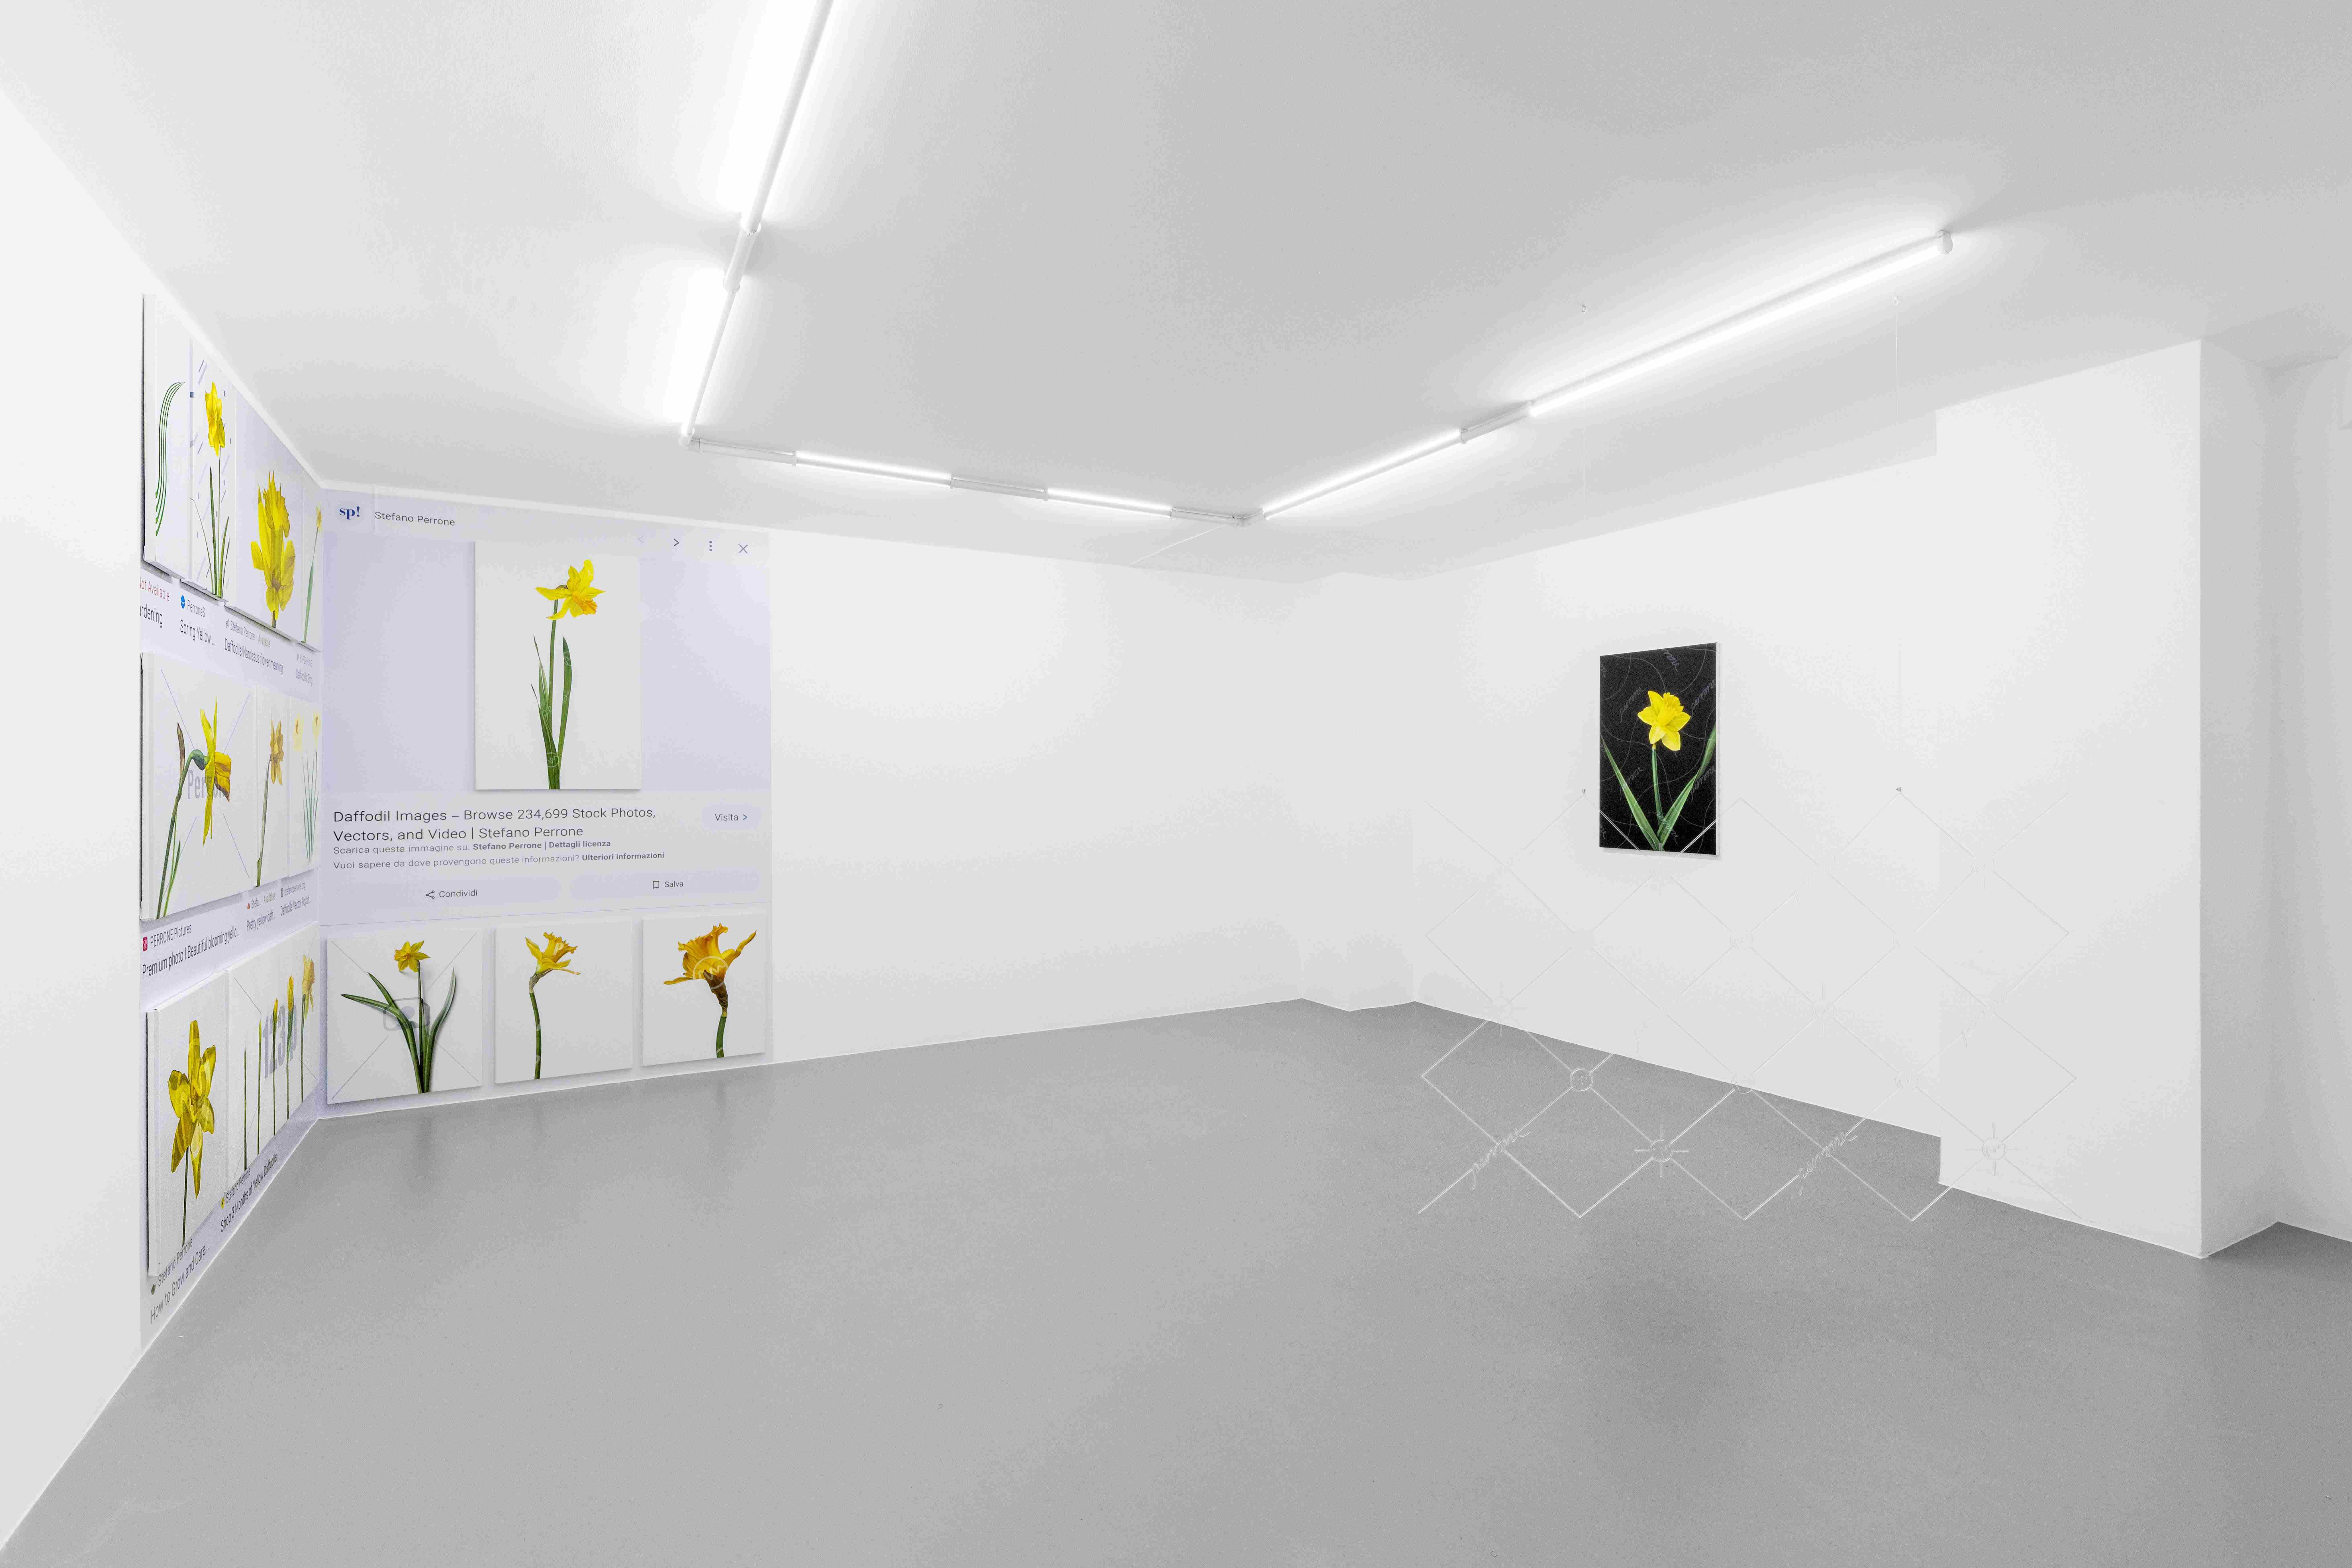 Stefano Perrone, Stunning Free Images to Use Anywhere, 2024, installation view @RIBOT